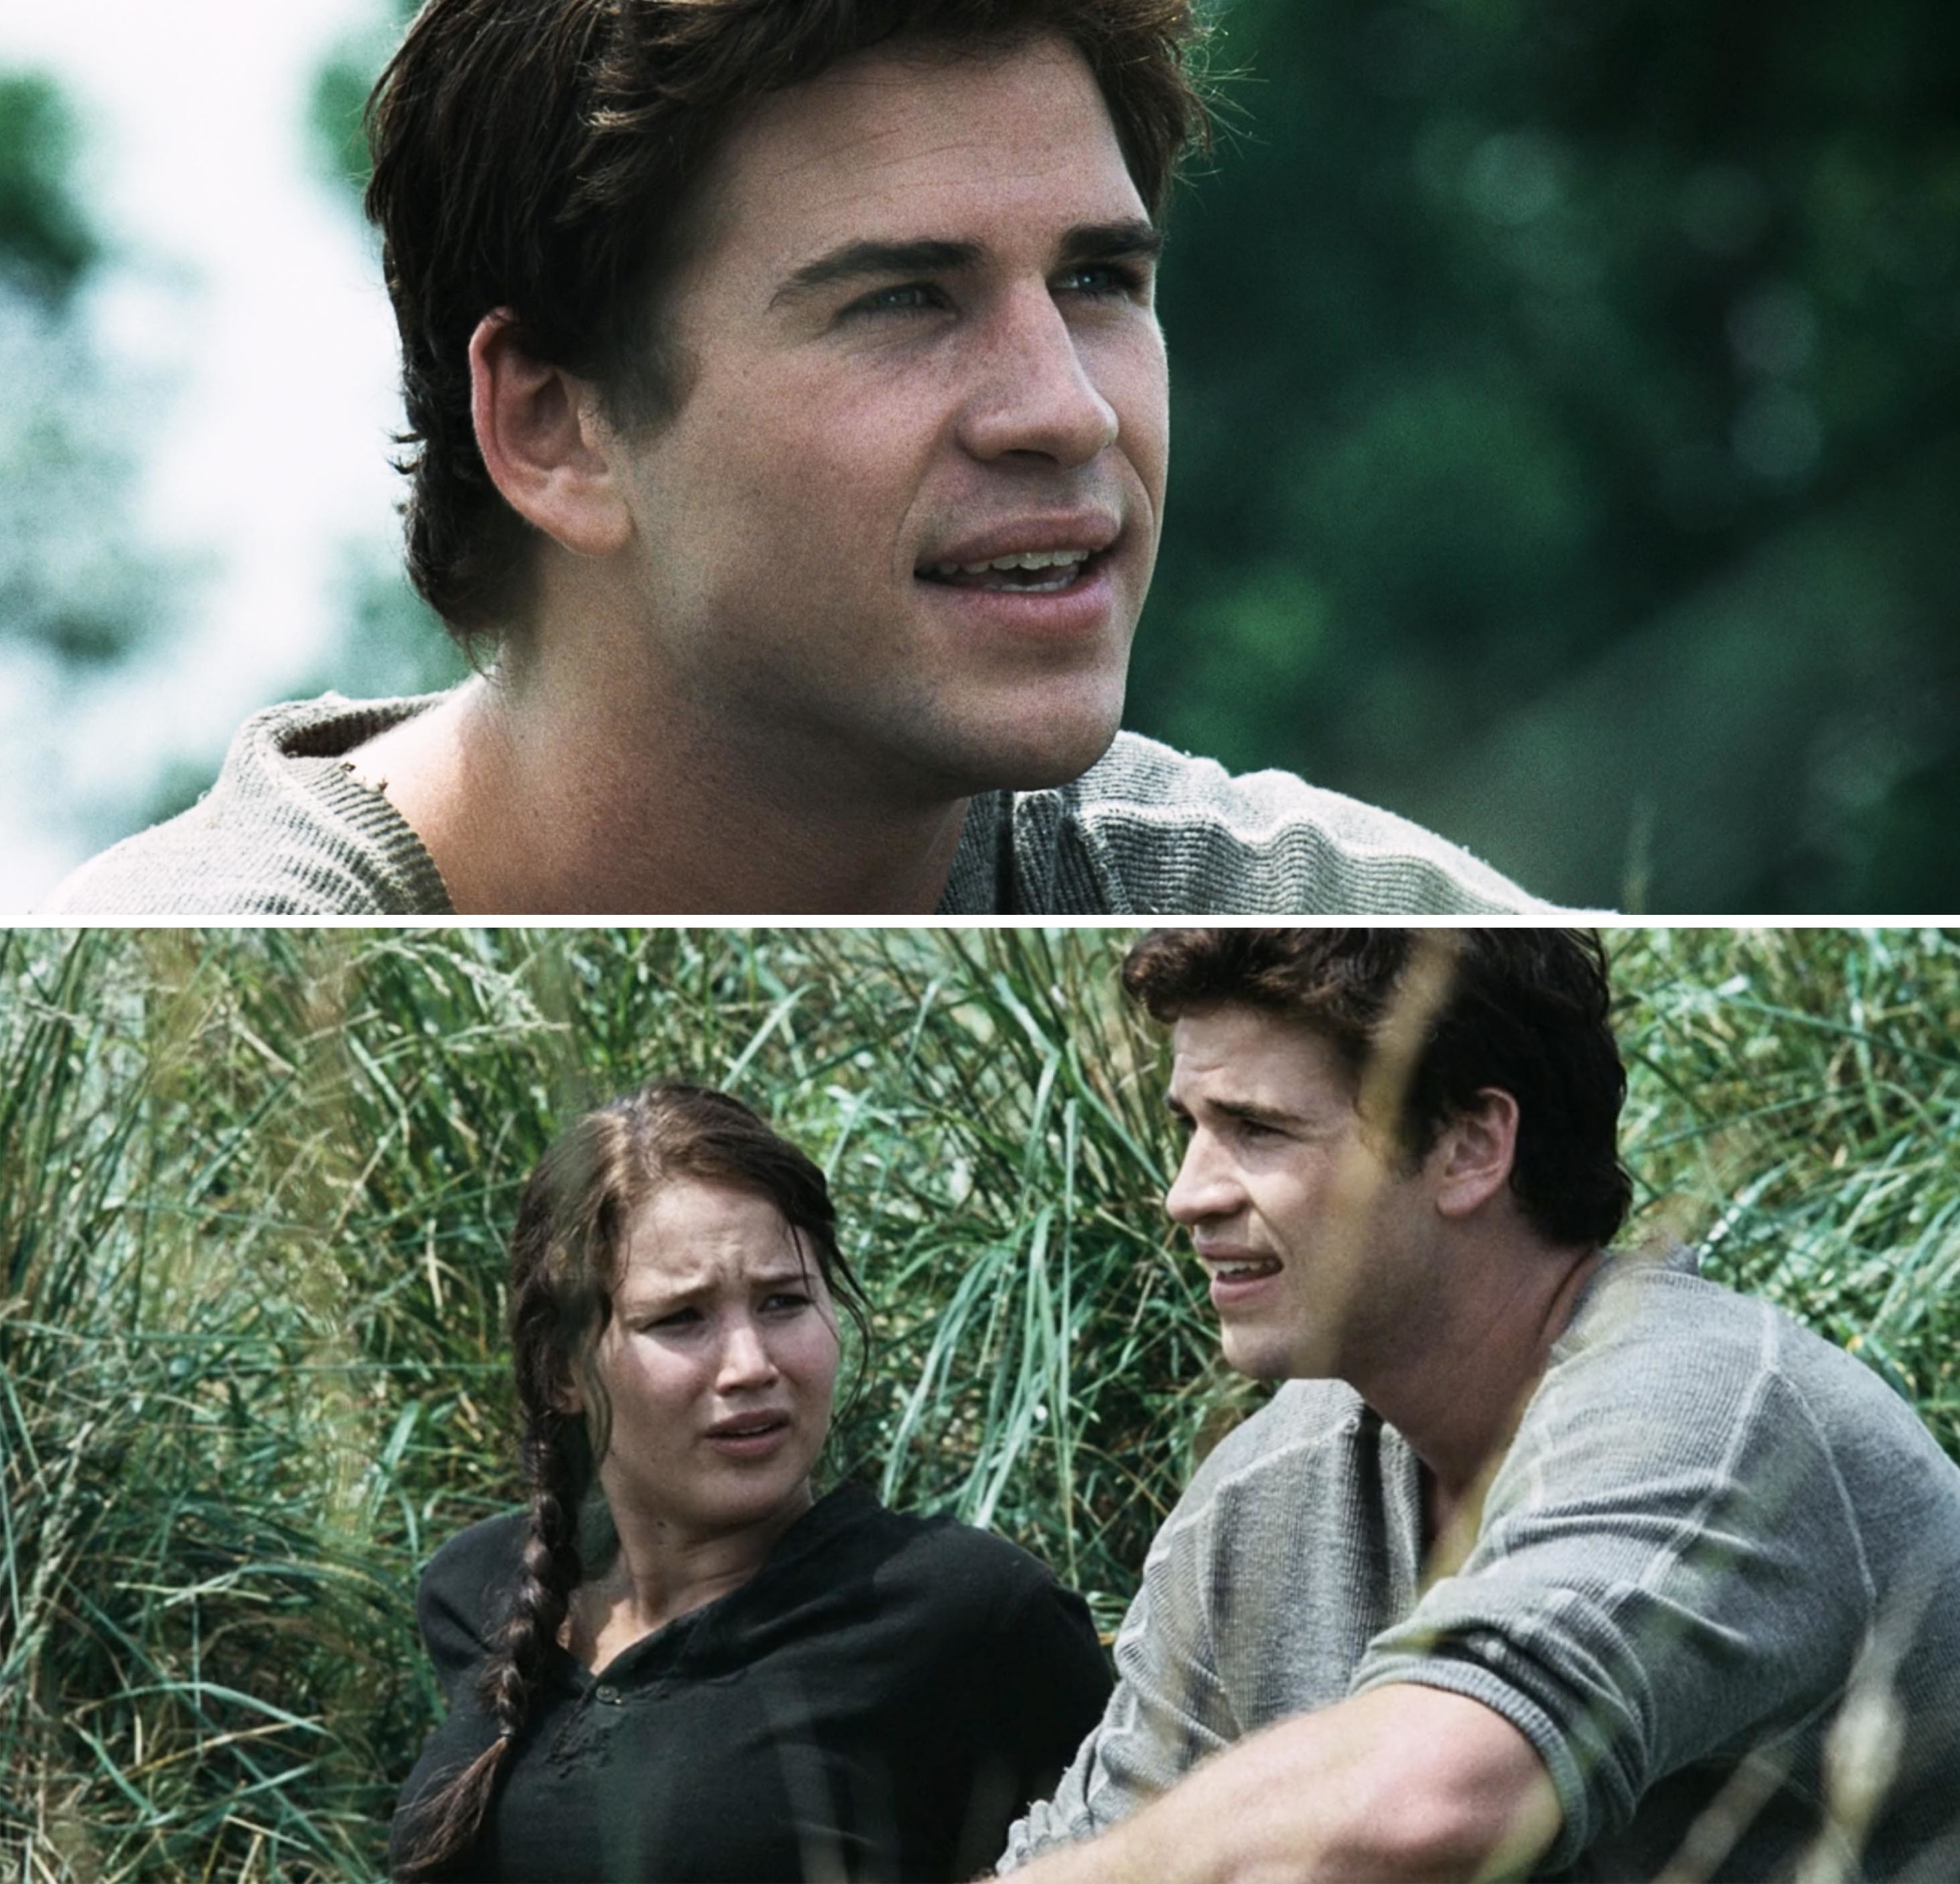 katniss and gale sitting in the field